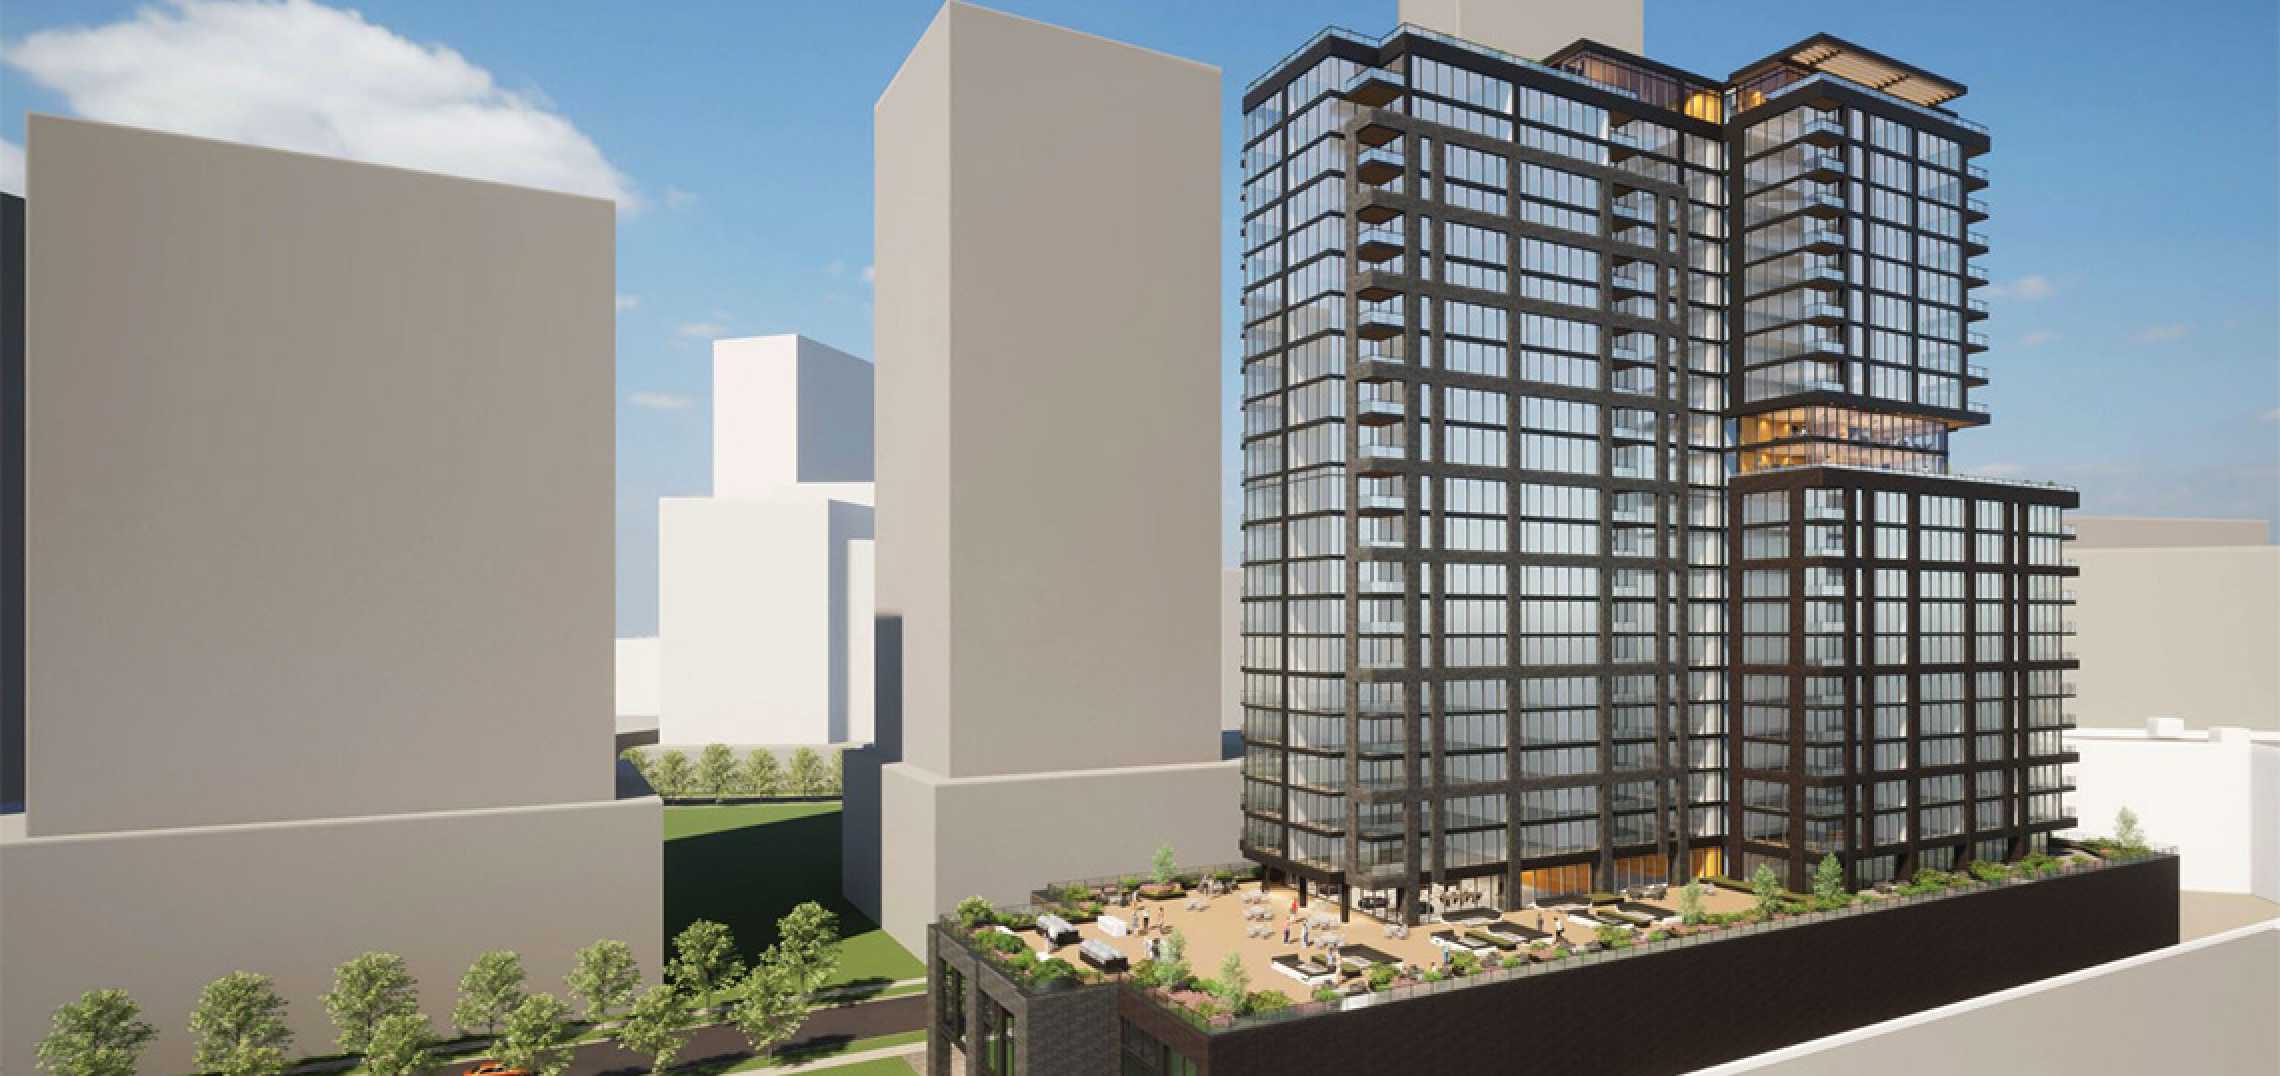 Committee on Design reviews 2033 N. Kingsbury The 25-story tower would rise next to Lincoln Yards